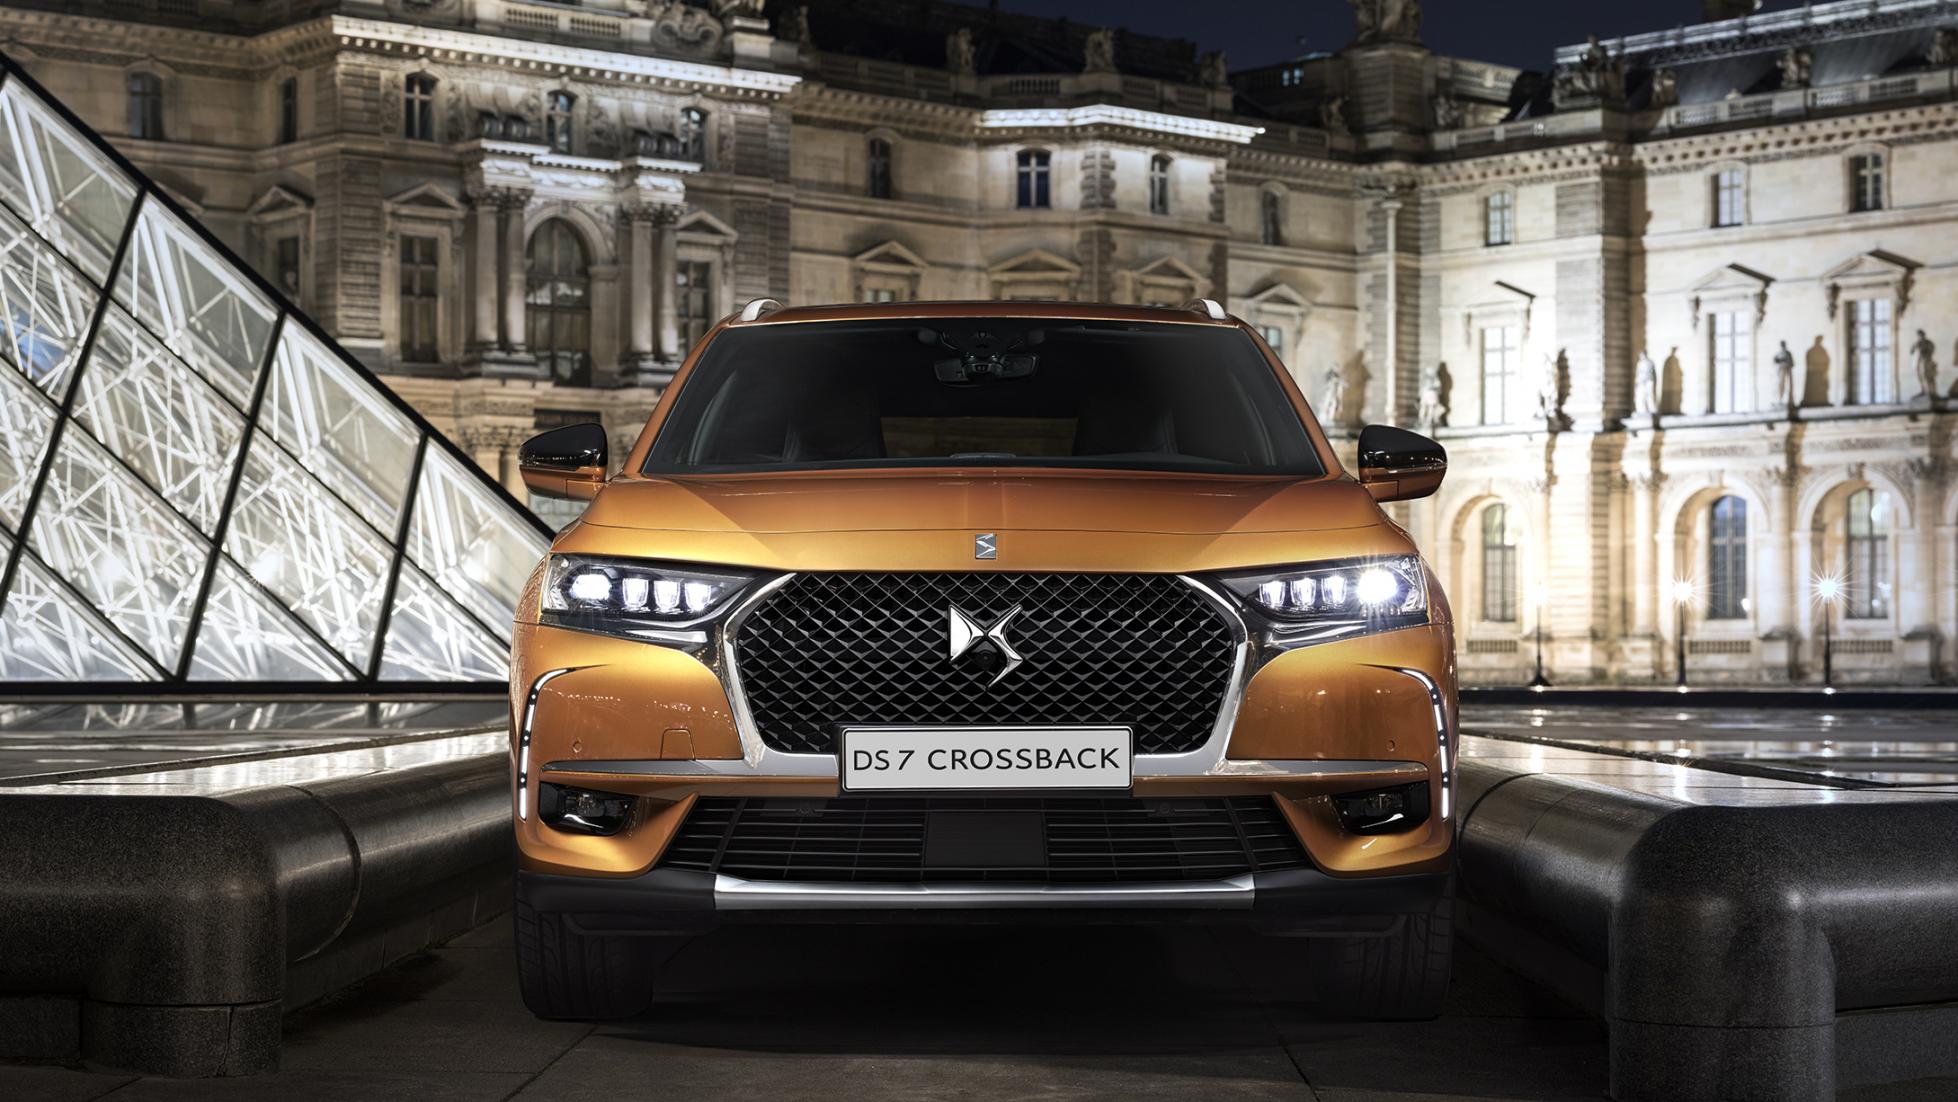 2017 DS7 Crossback